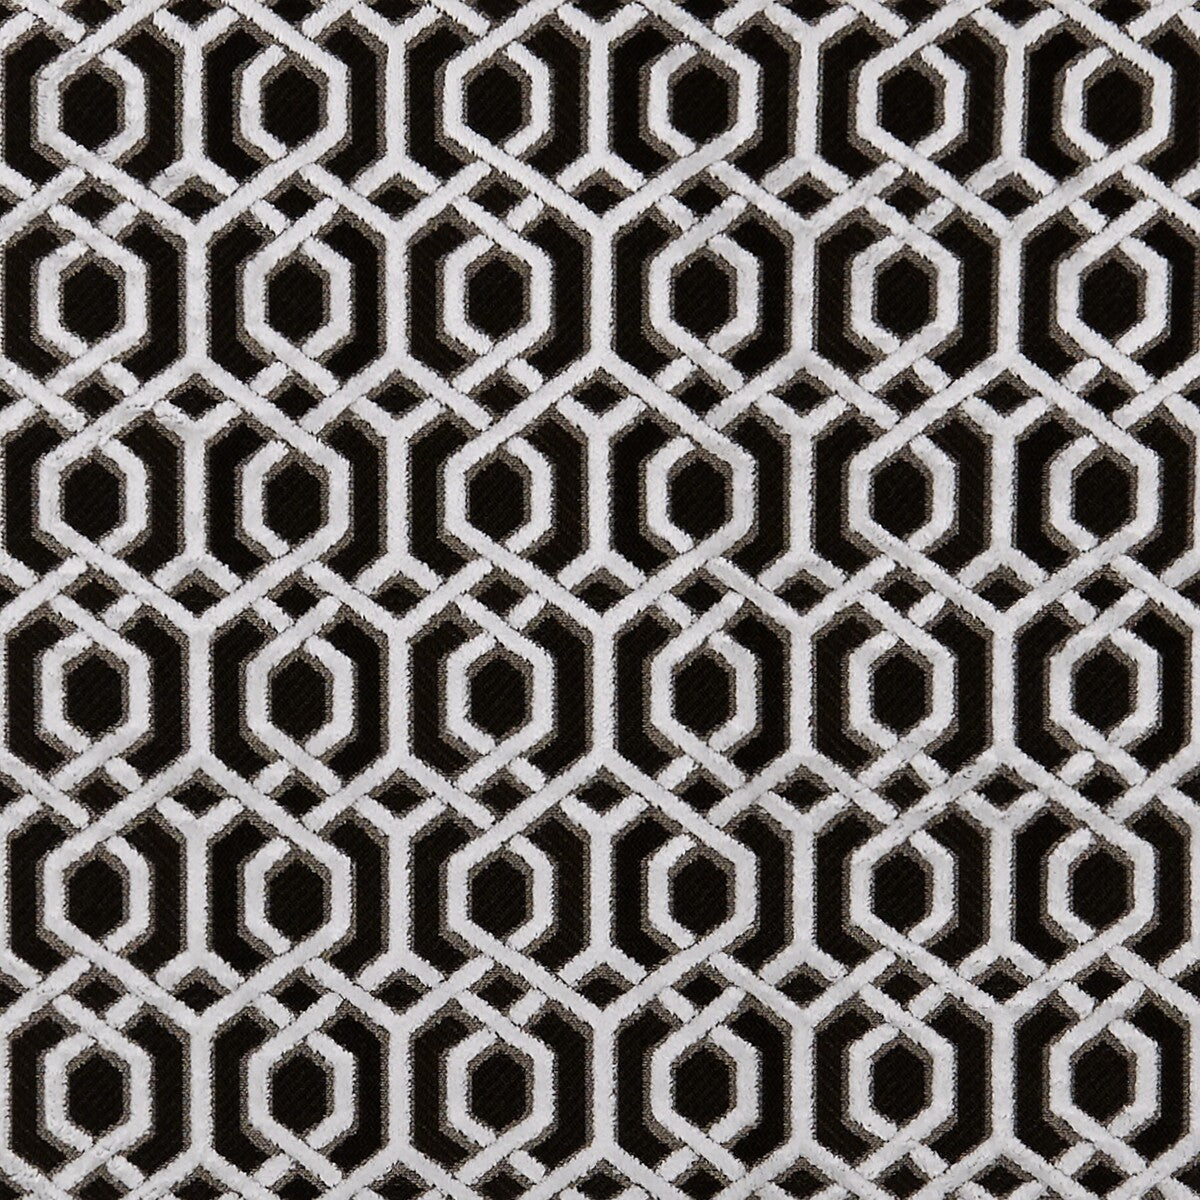 Bw1042 fabric in black/white color - pattern F0944/01.CAC.0 - by Clarke And Clarke in the Clarke &amp; Clarke Black + White collection